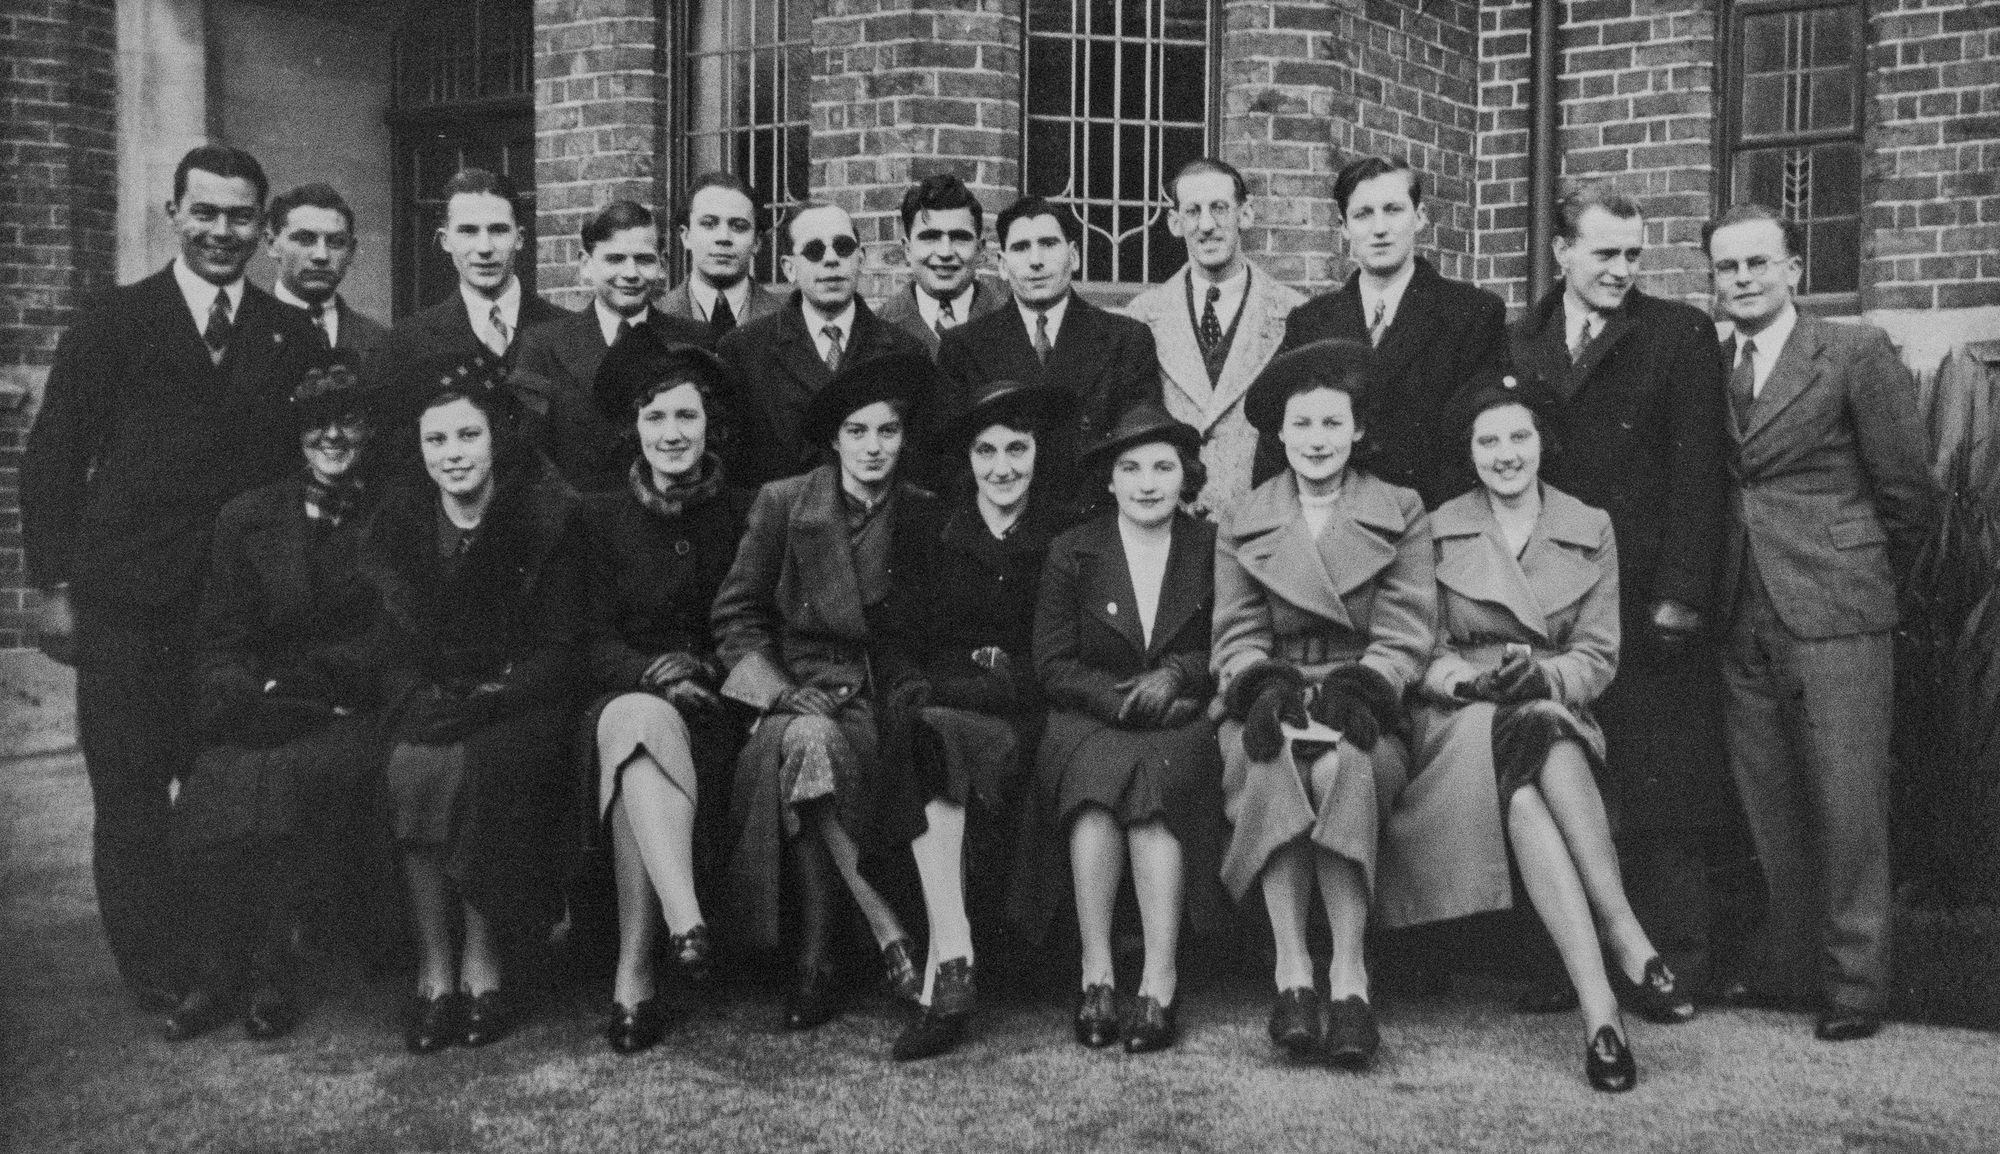 Bicester Methodist Sunday School teachers in 1939 (George is the 5th man from the left).